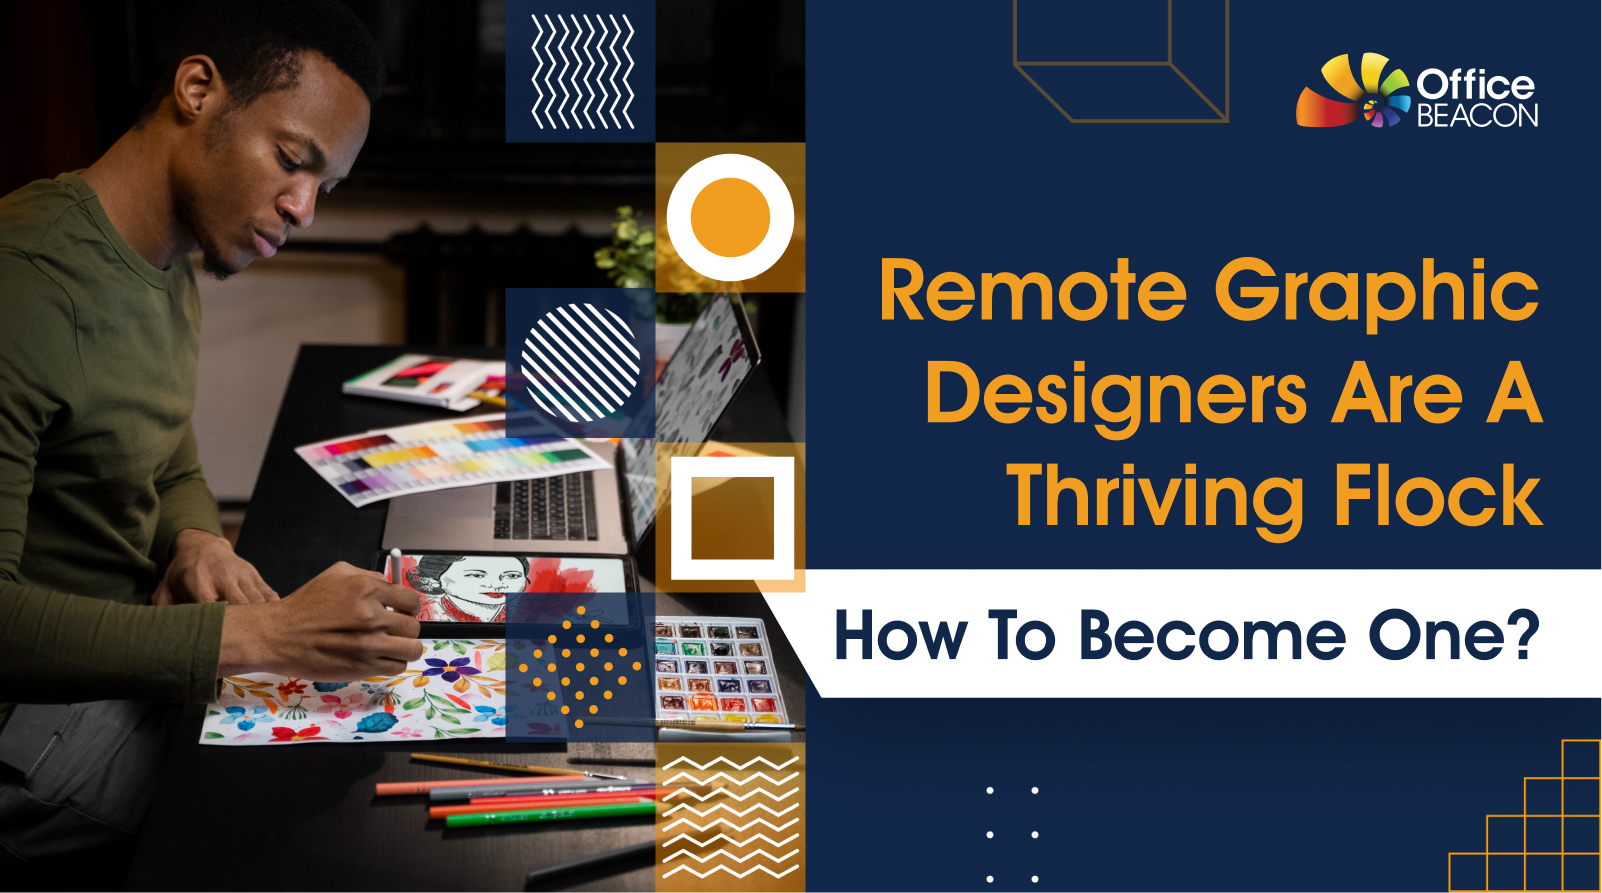 Remote Graphic Designers Are A Thriving Flock – How To Become One?